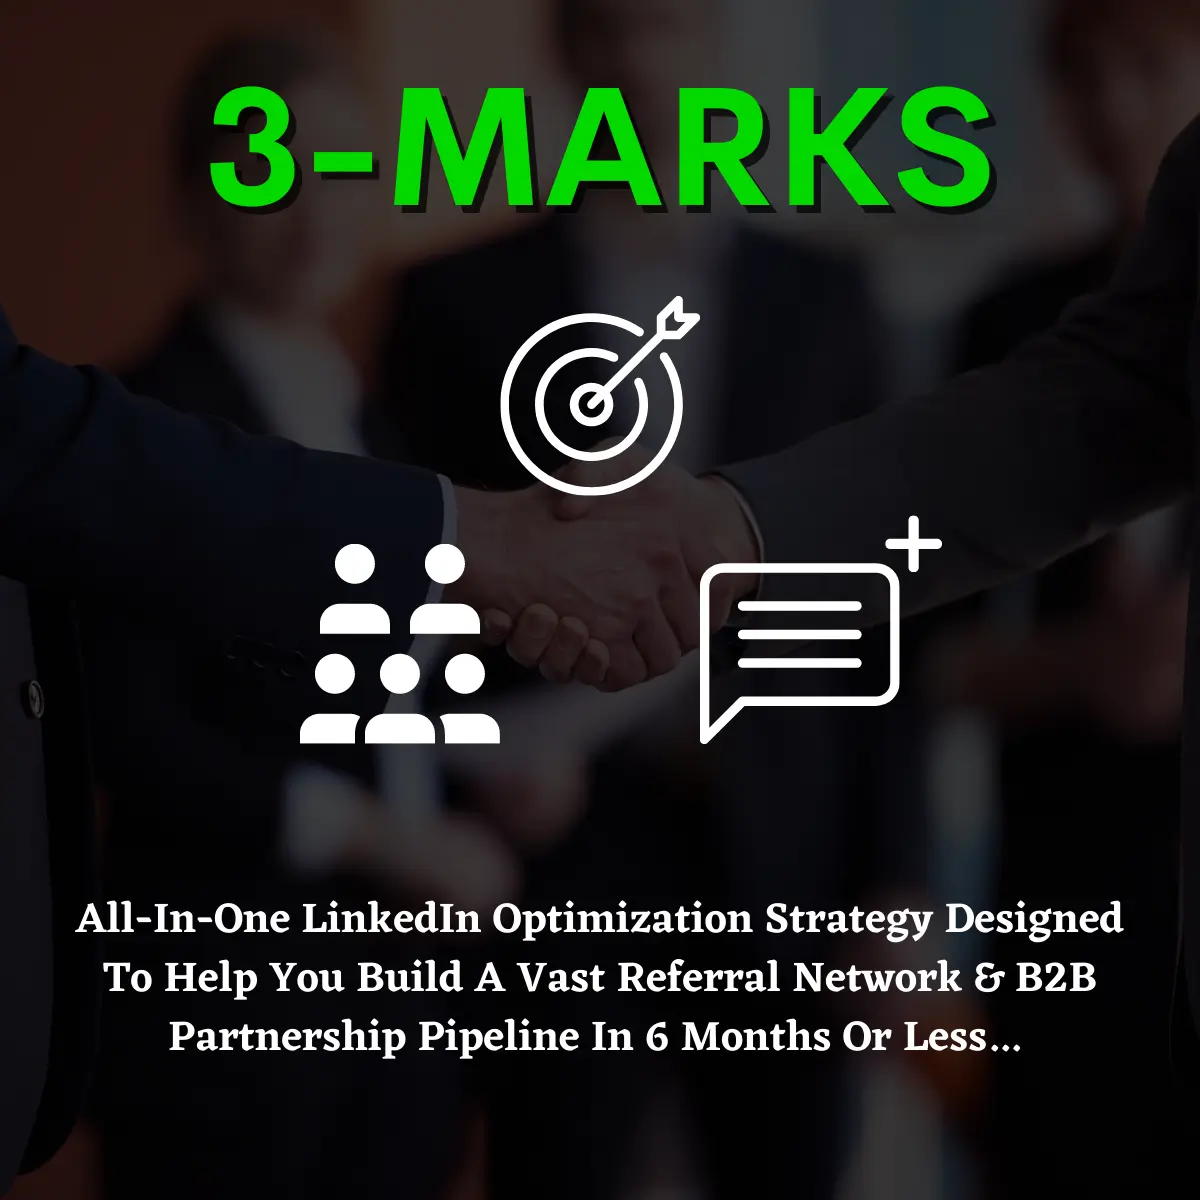 3-MARKS LinkedIn Profile Optimization strategy for all B2B businesses, looking to grow their referral networks effectively and consistently ech month